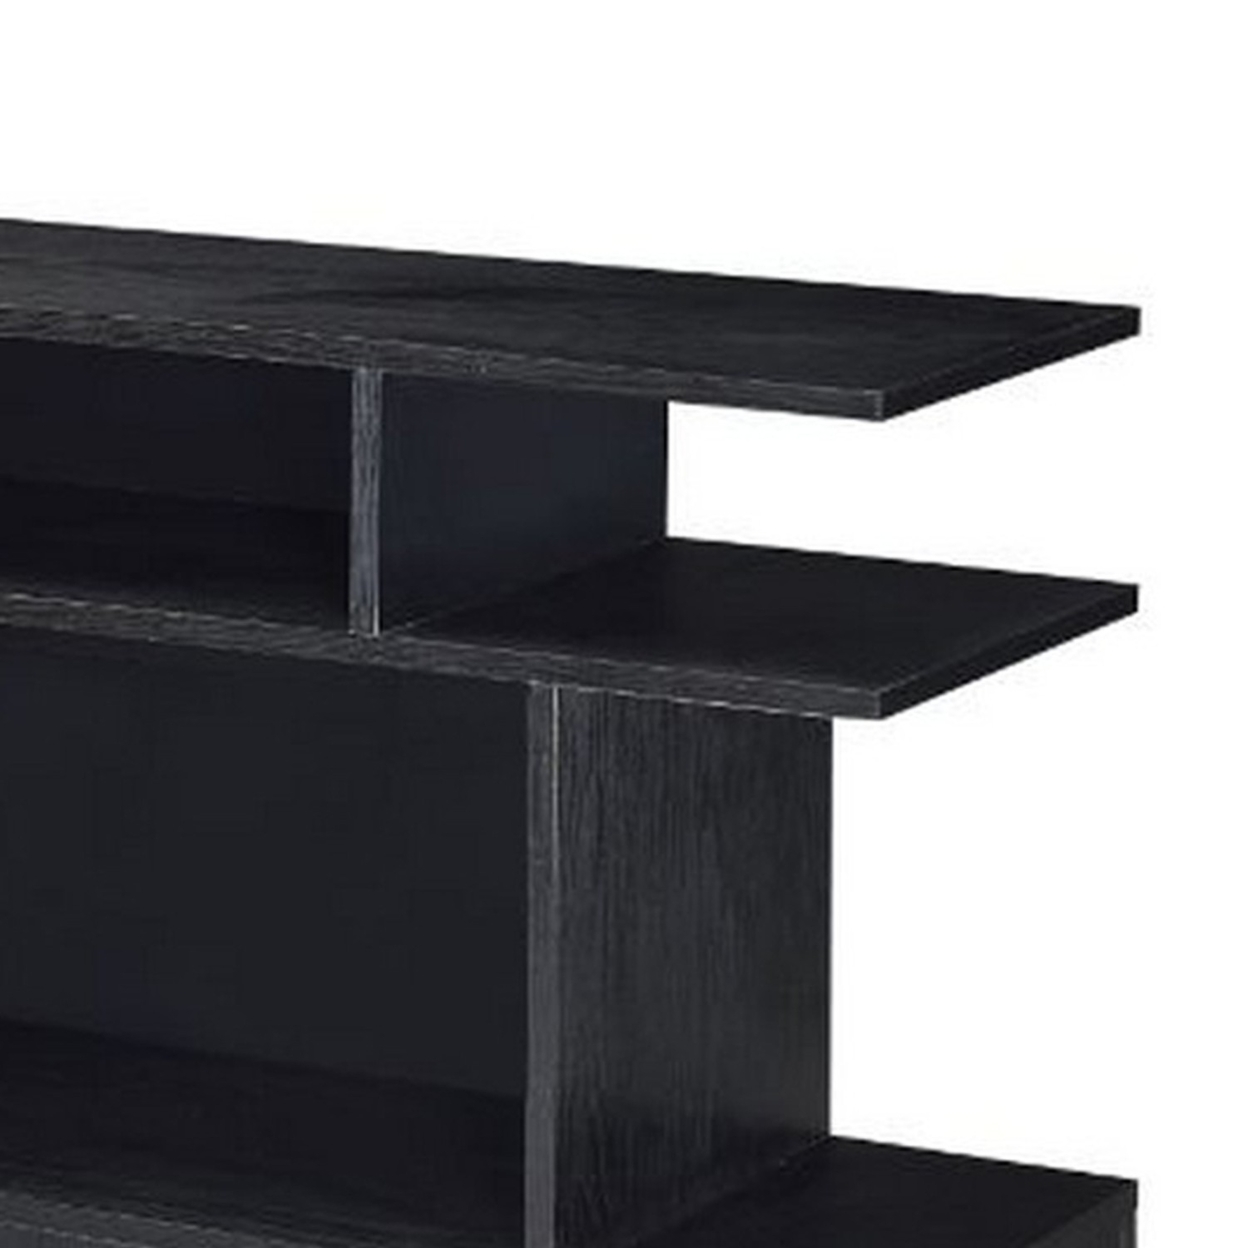 Sofa Table With 2 Open Compartments And Extended Sides, Black- Saltoro Sherpi